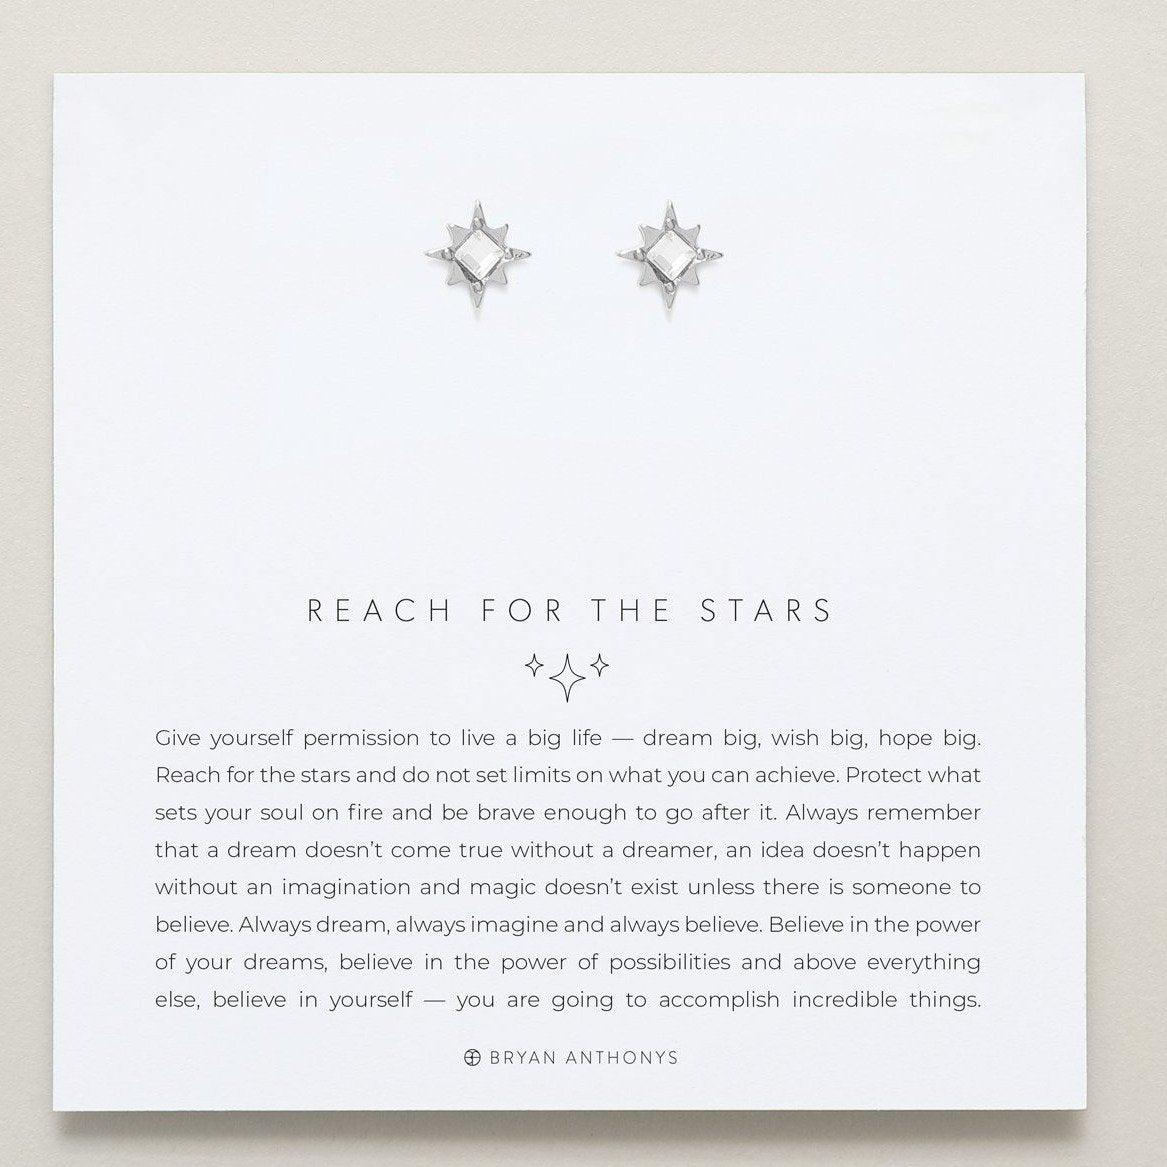 Bryan Anthony's Reach For The Stars Earrings - Silver Clothing/Accessories Bryan Anthonys 